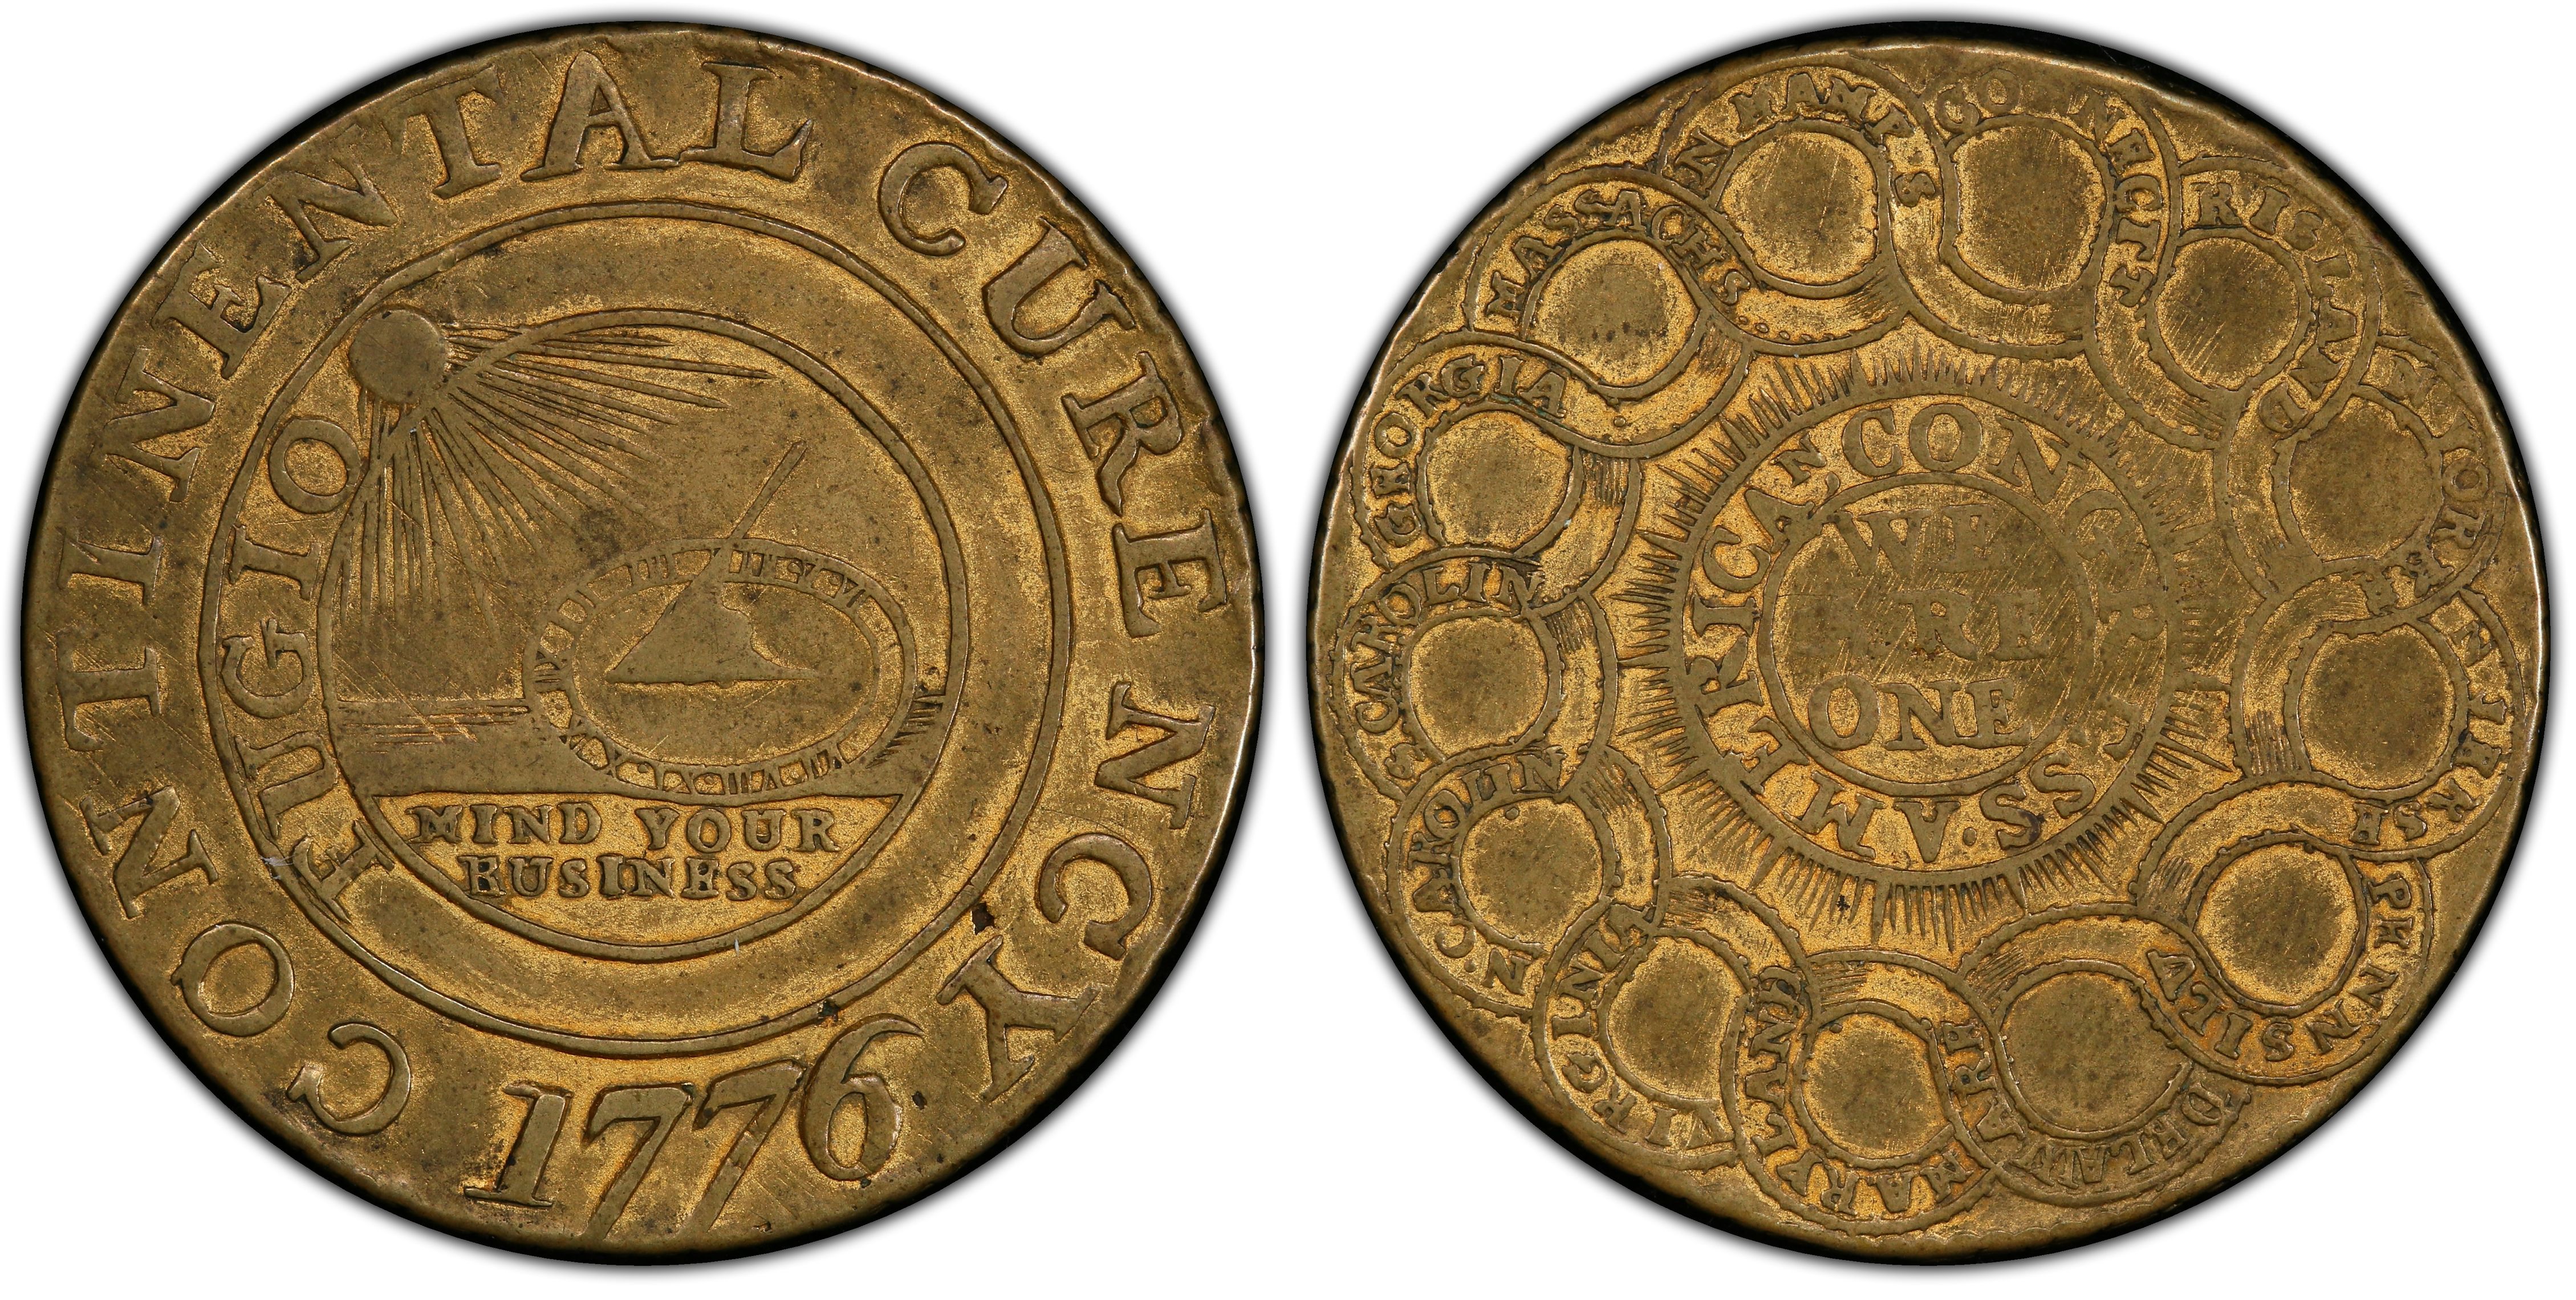 1776 $1 CURENCY, Brass (Regular Strike) Proposed National Issues - PCGS  CoinFacts